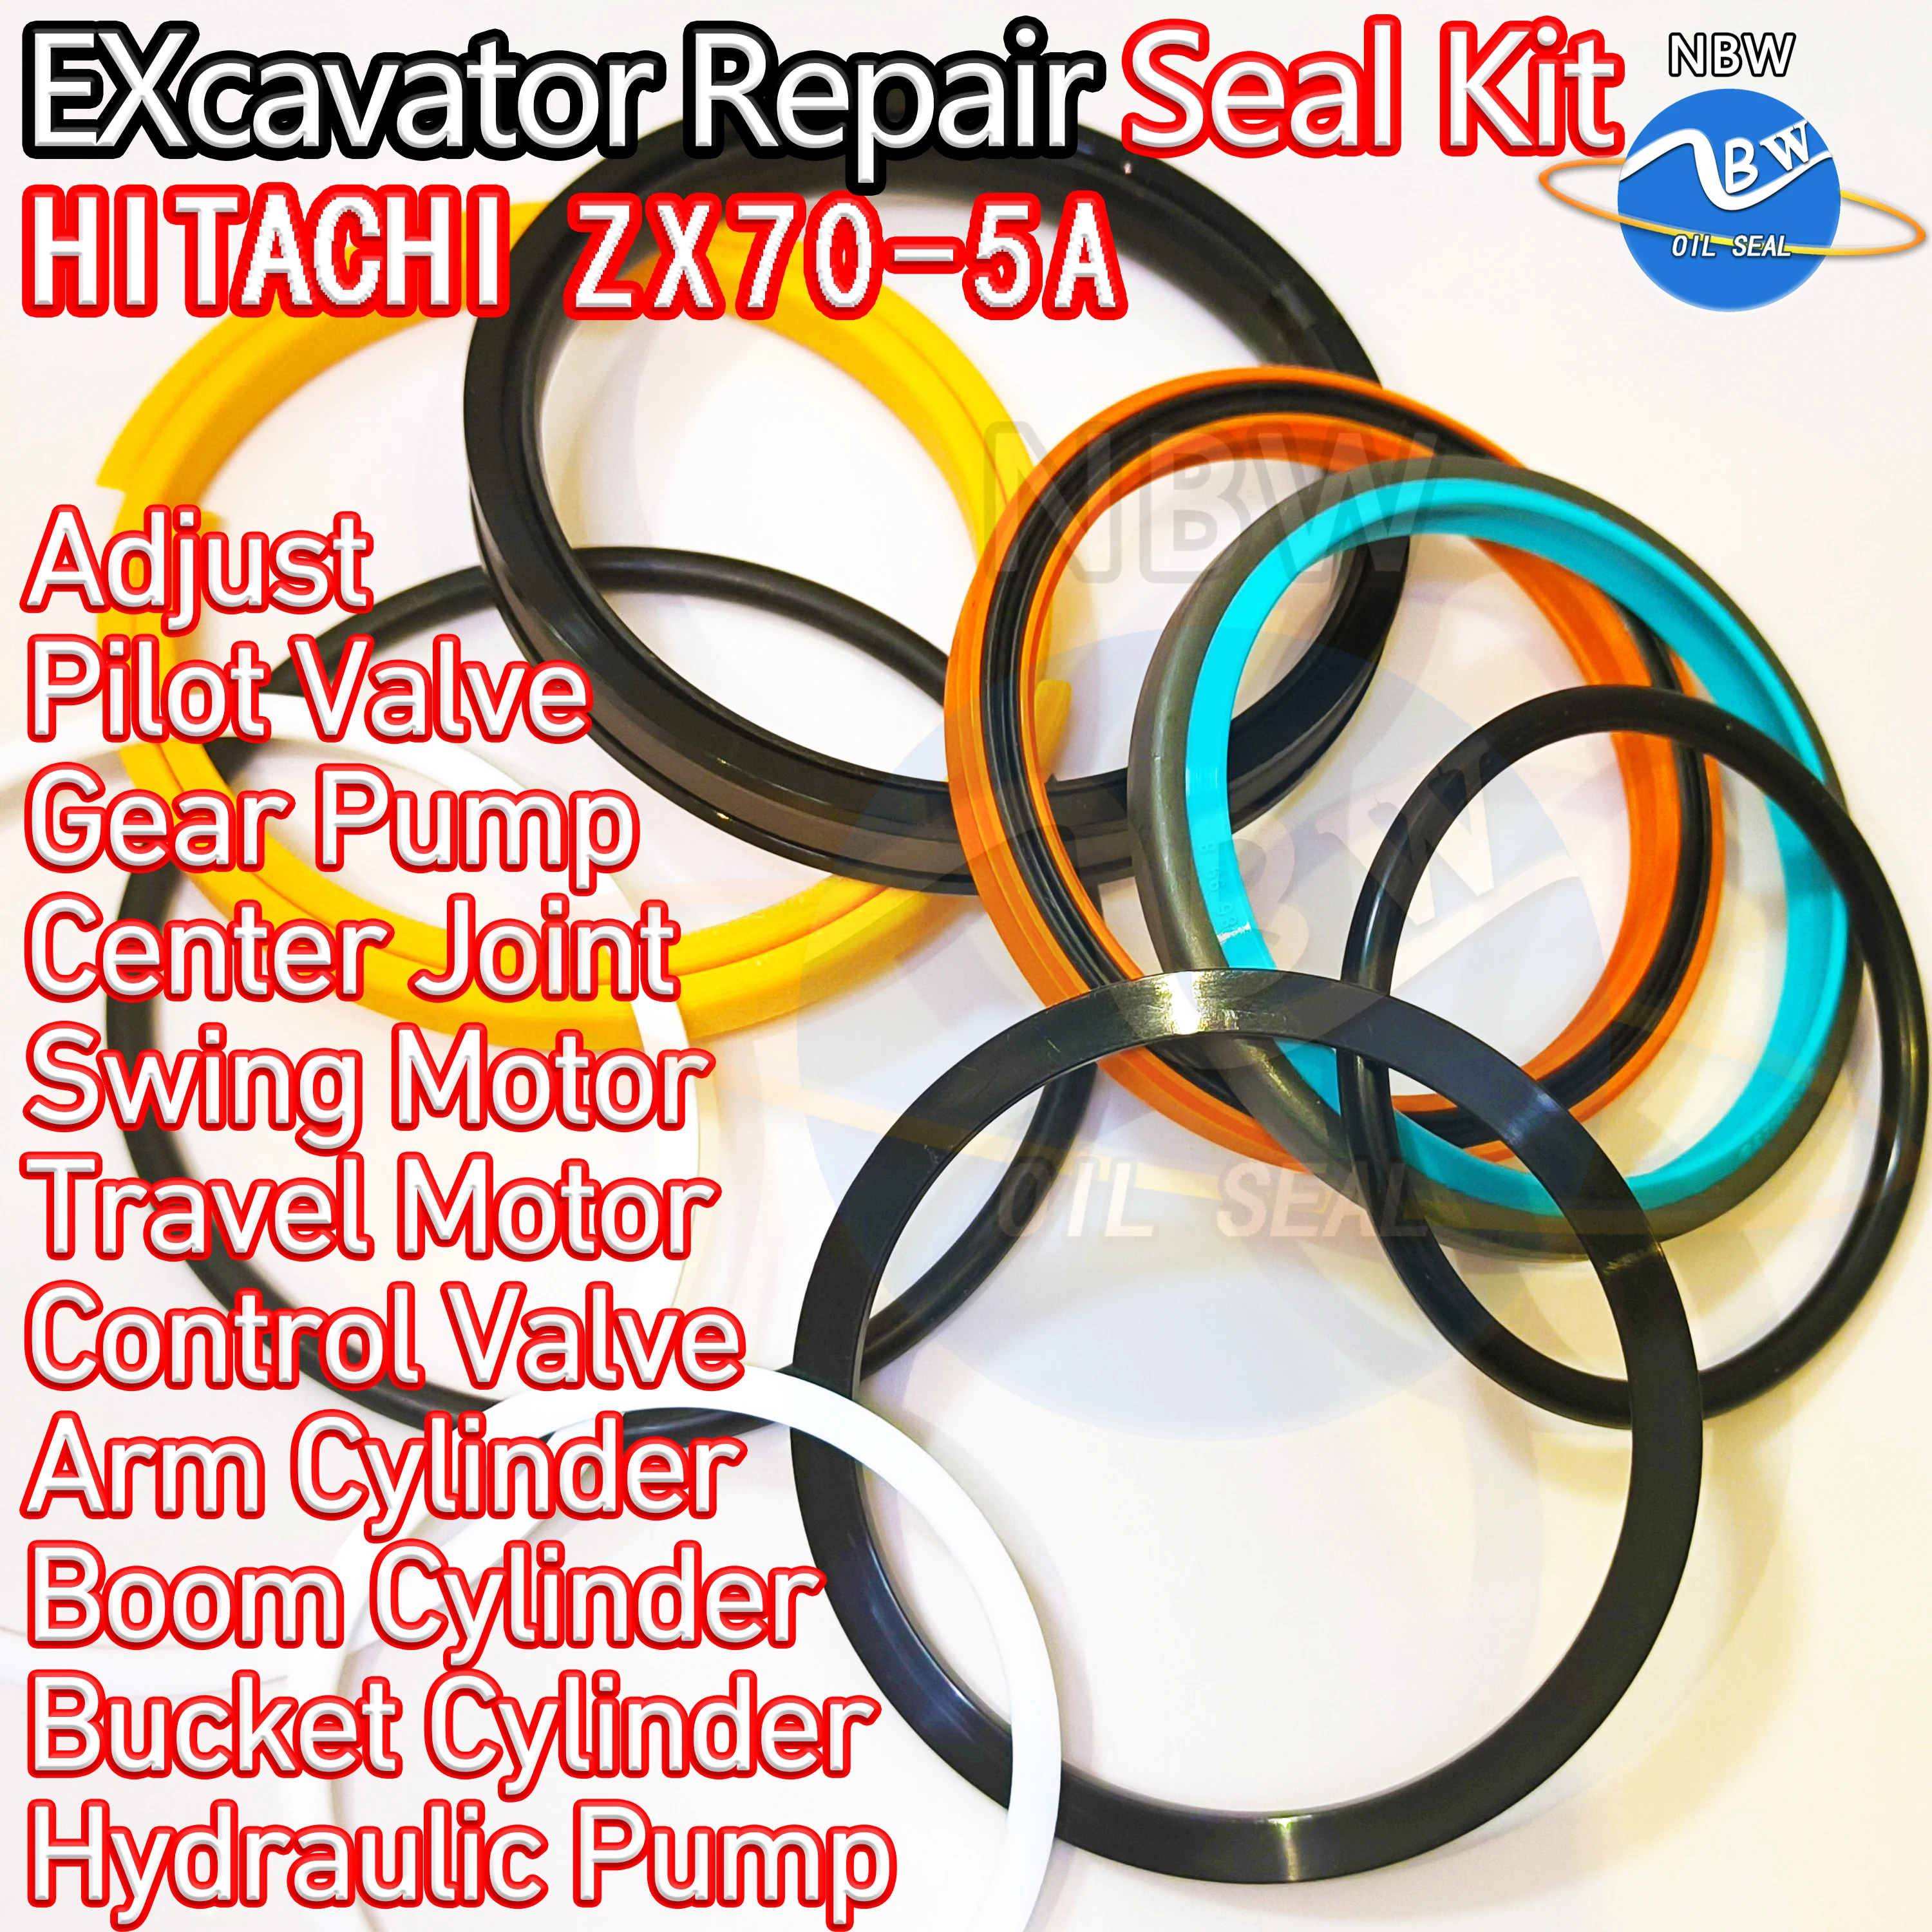 

HITACHI ZX70-5A Oil Seal Kit Pilot Valve Gear Pump Center Joint For Excavator Hydraulic Repair O-ring Swing Motor ZX70 5A